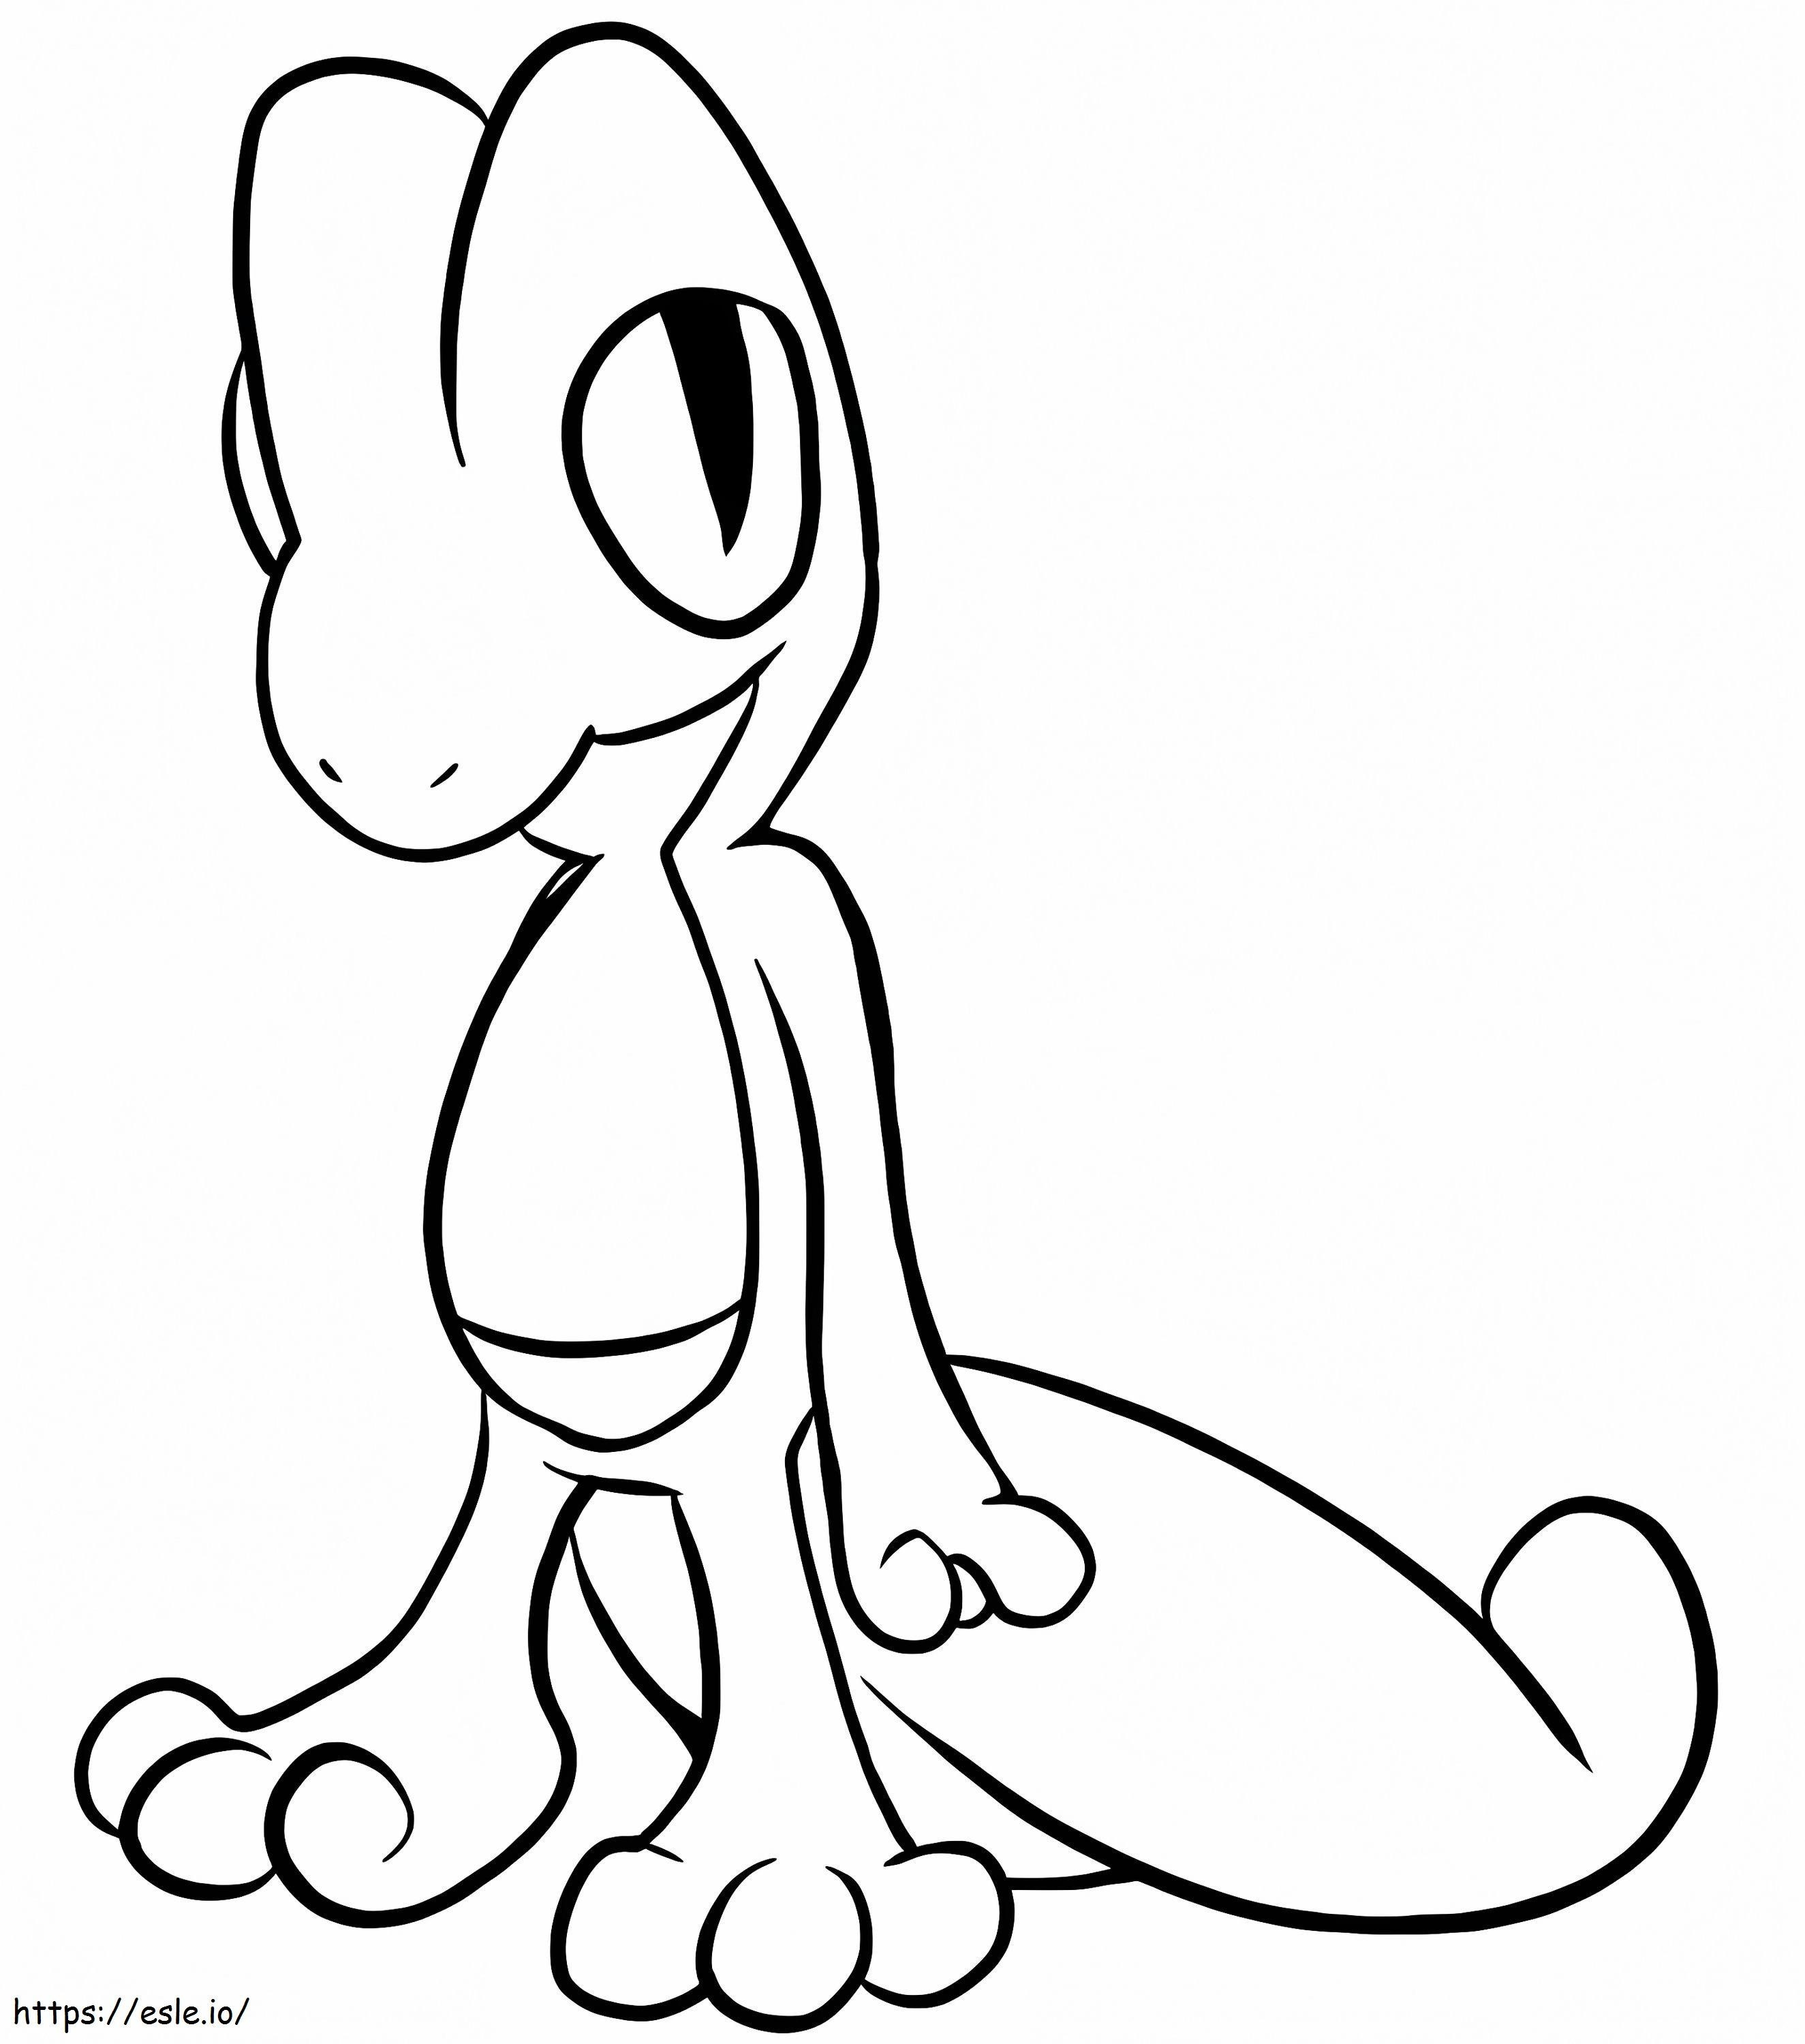 Cute Treecko coloring page